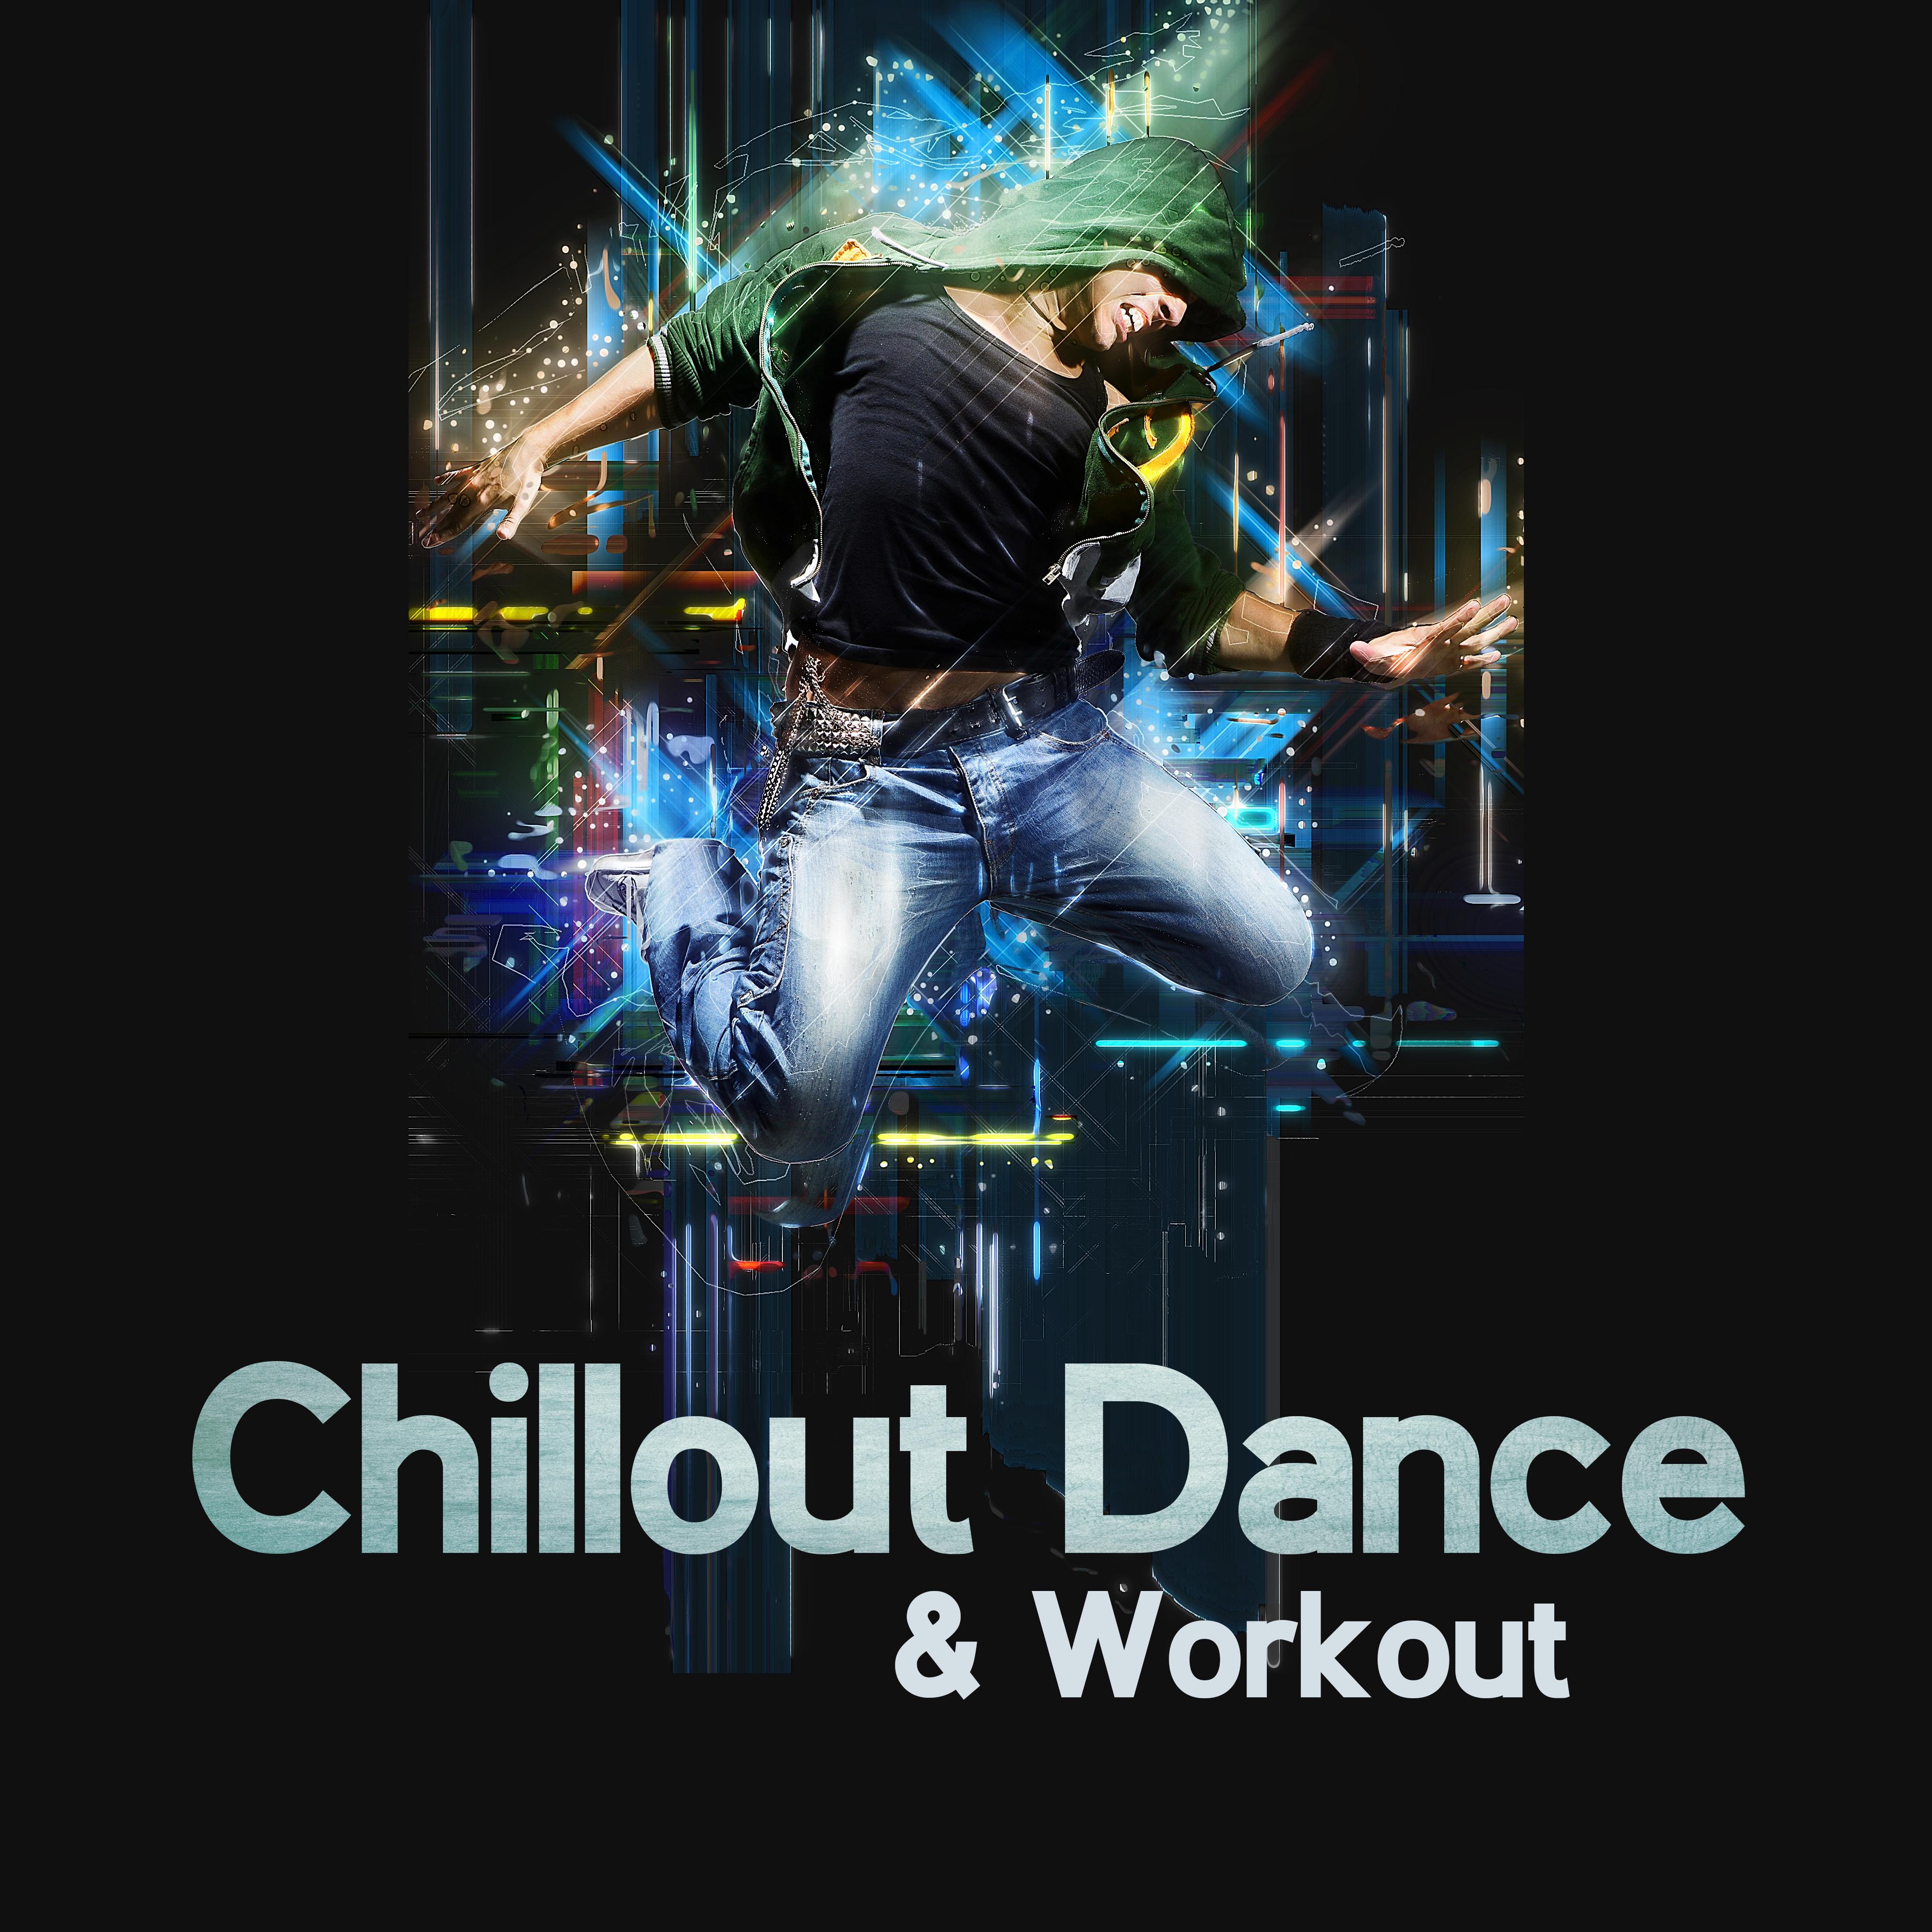 Chillout Dance & Workout